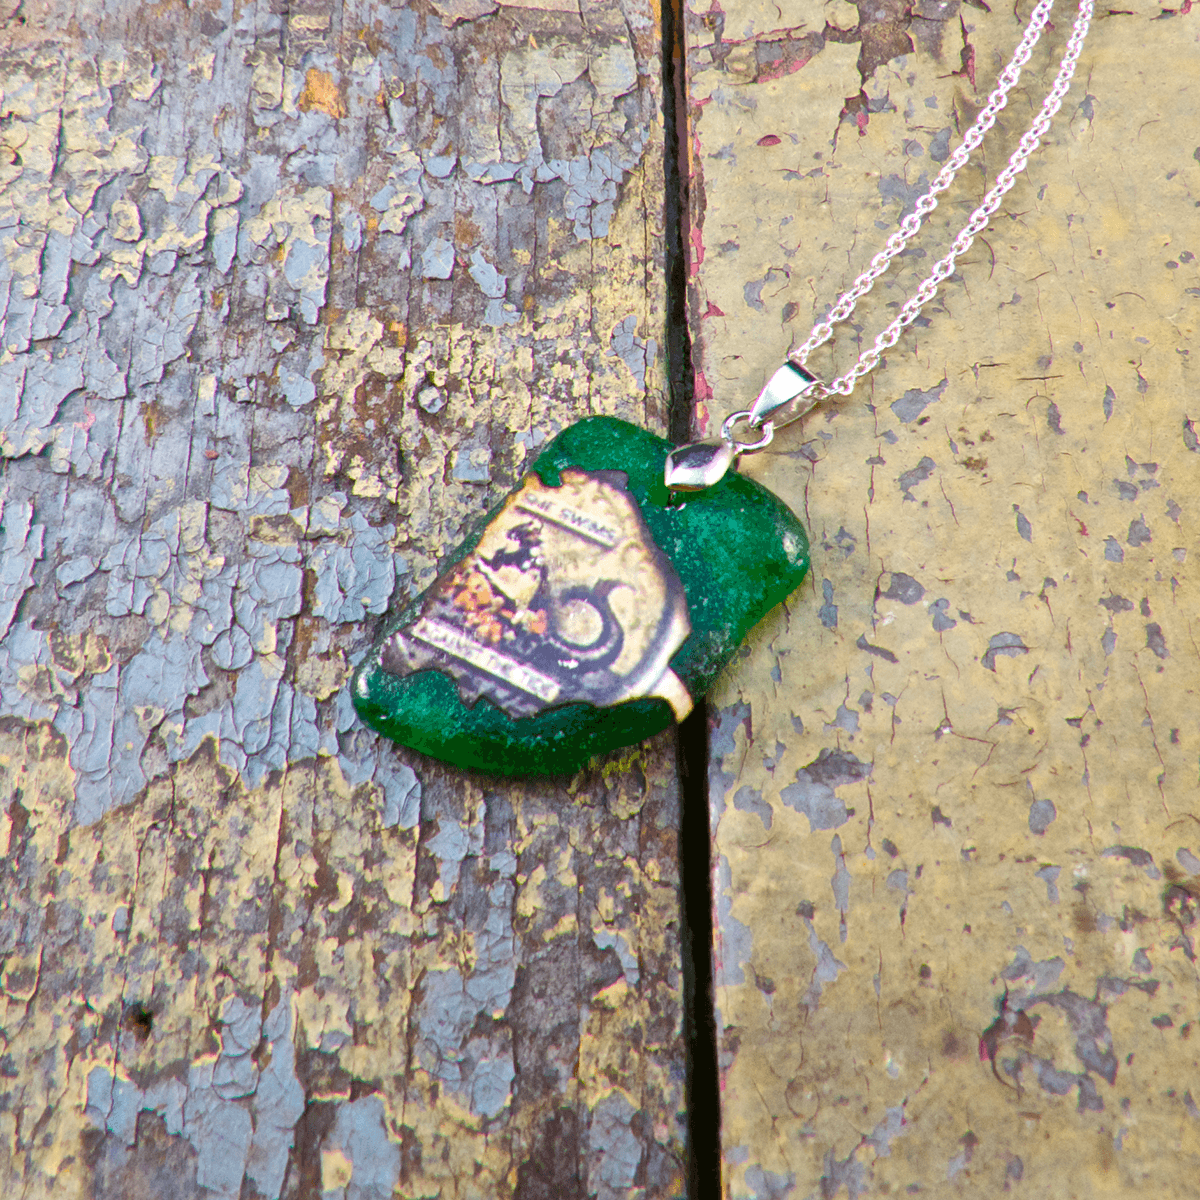 beach glass Toronto Canada one-of-a-kind RECYCLED Unique pendants jewelry design